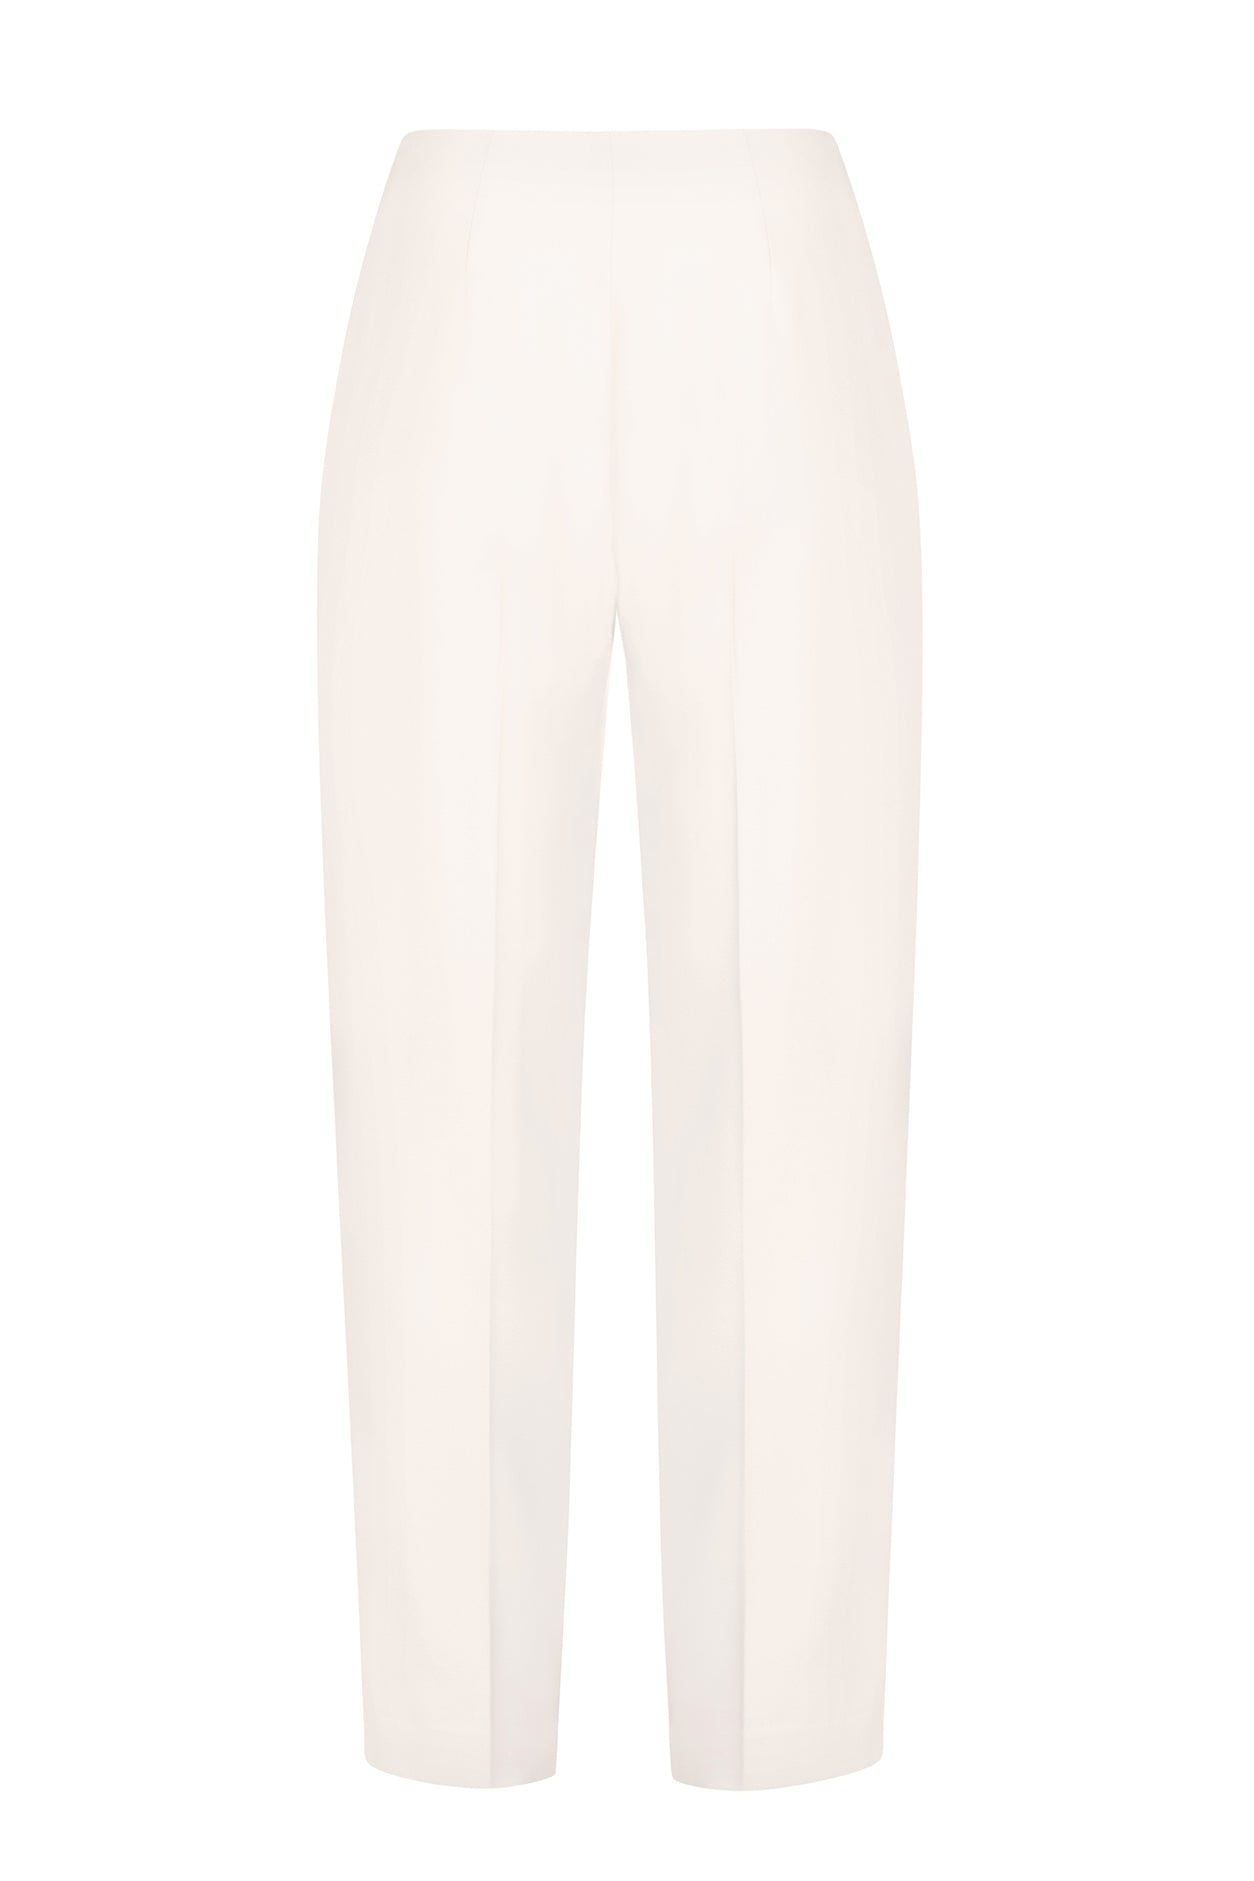 Narrow Trousers with Pressed Crease Detail in Ivory Wool Sateen - Phoebe